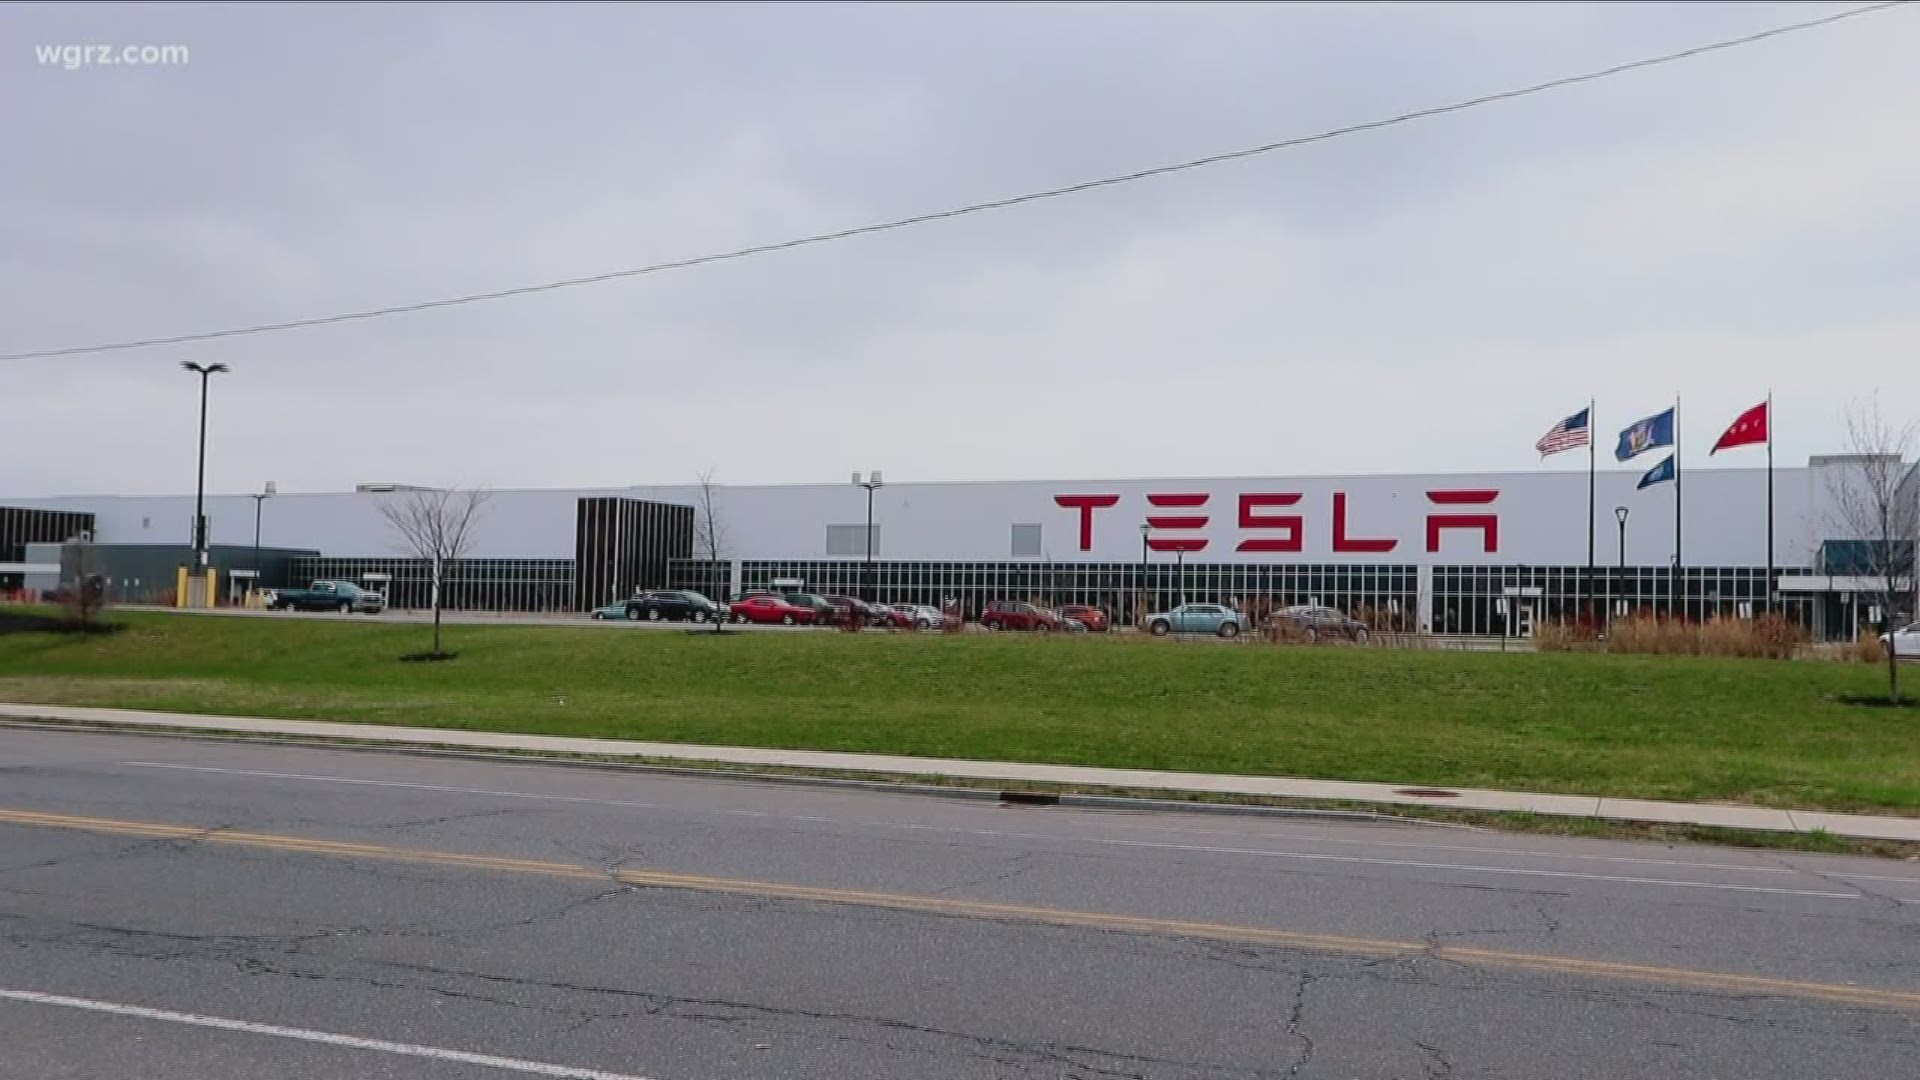 Last week Tesla promised ventilators. 
And they promised to reopen the plant in South Buffalo to make them. Where does that promise stand?